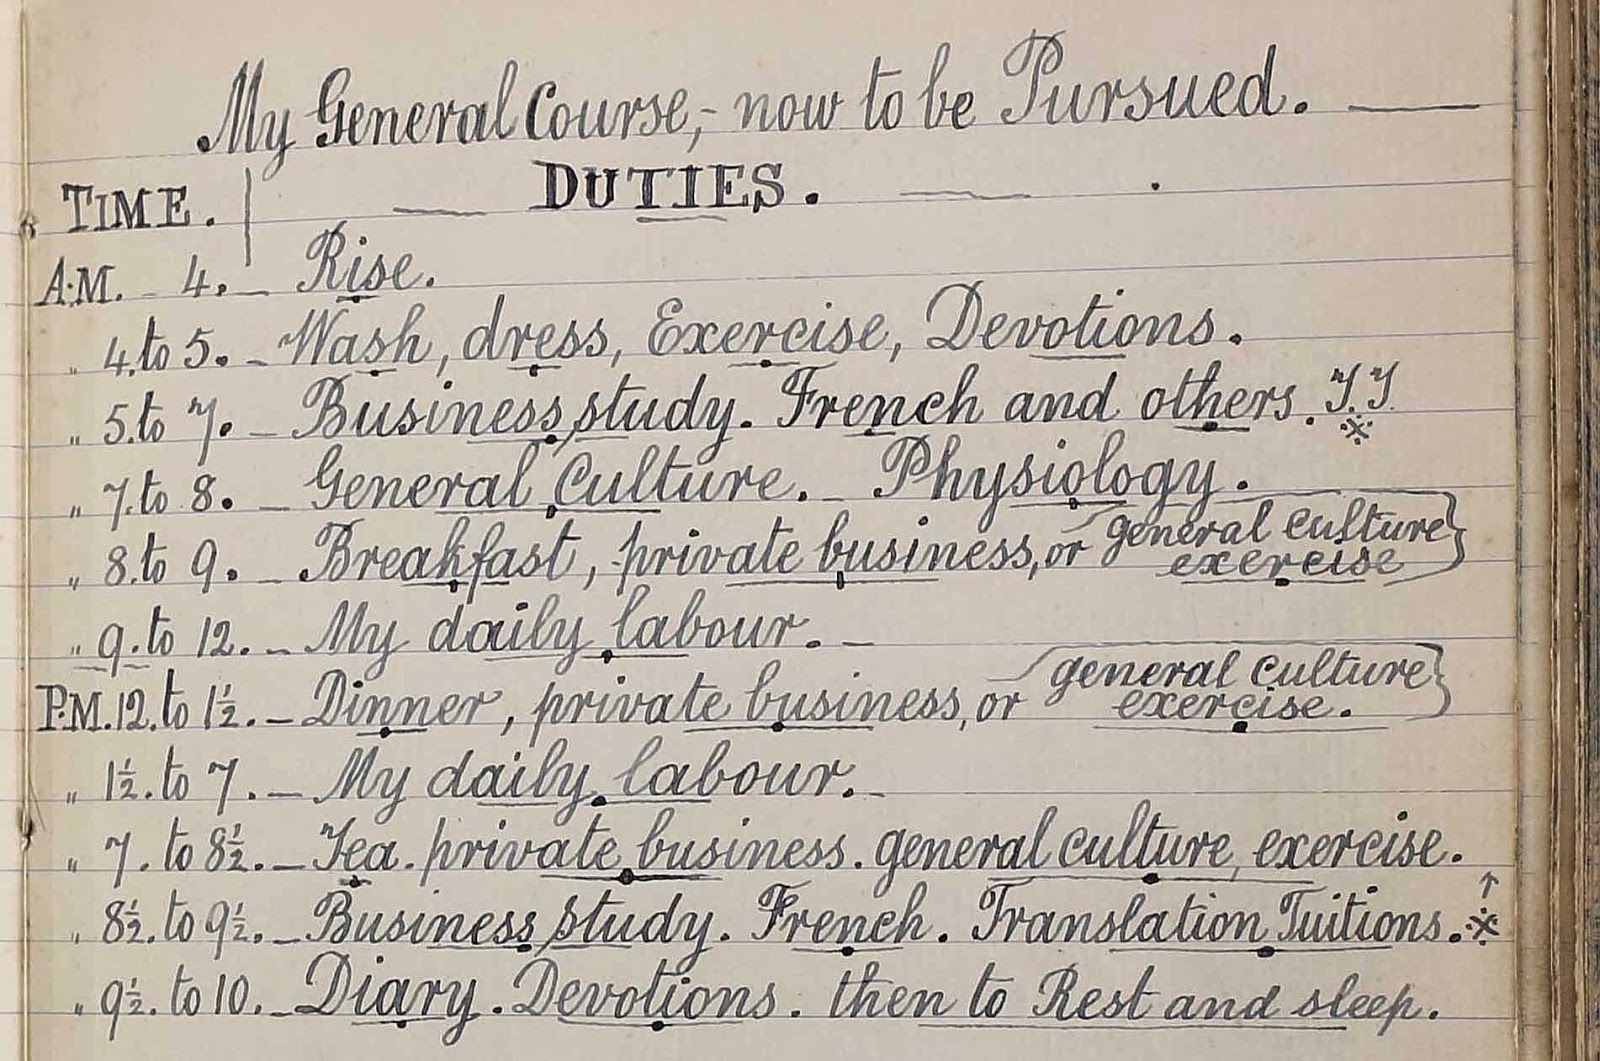 Diary page containing General Course of Duties